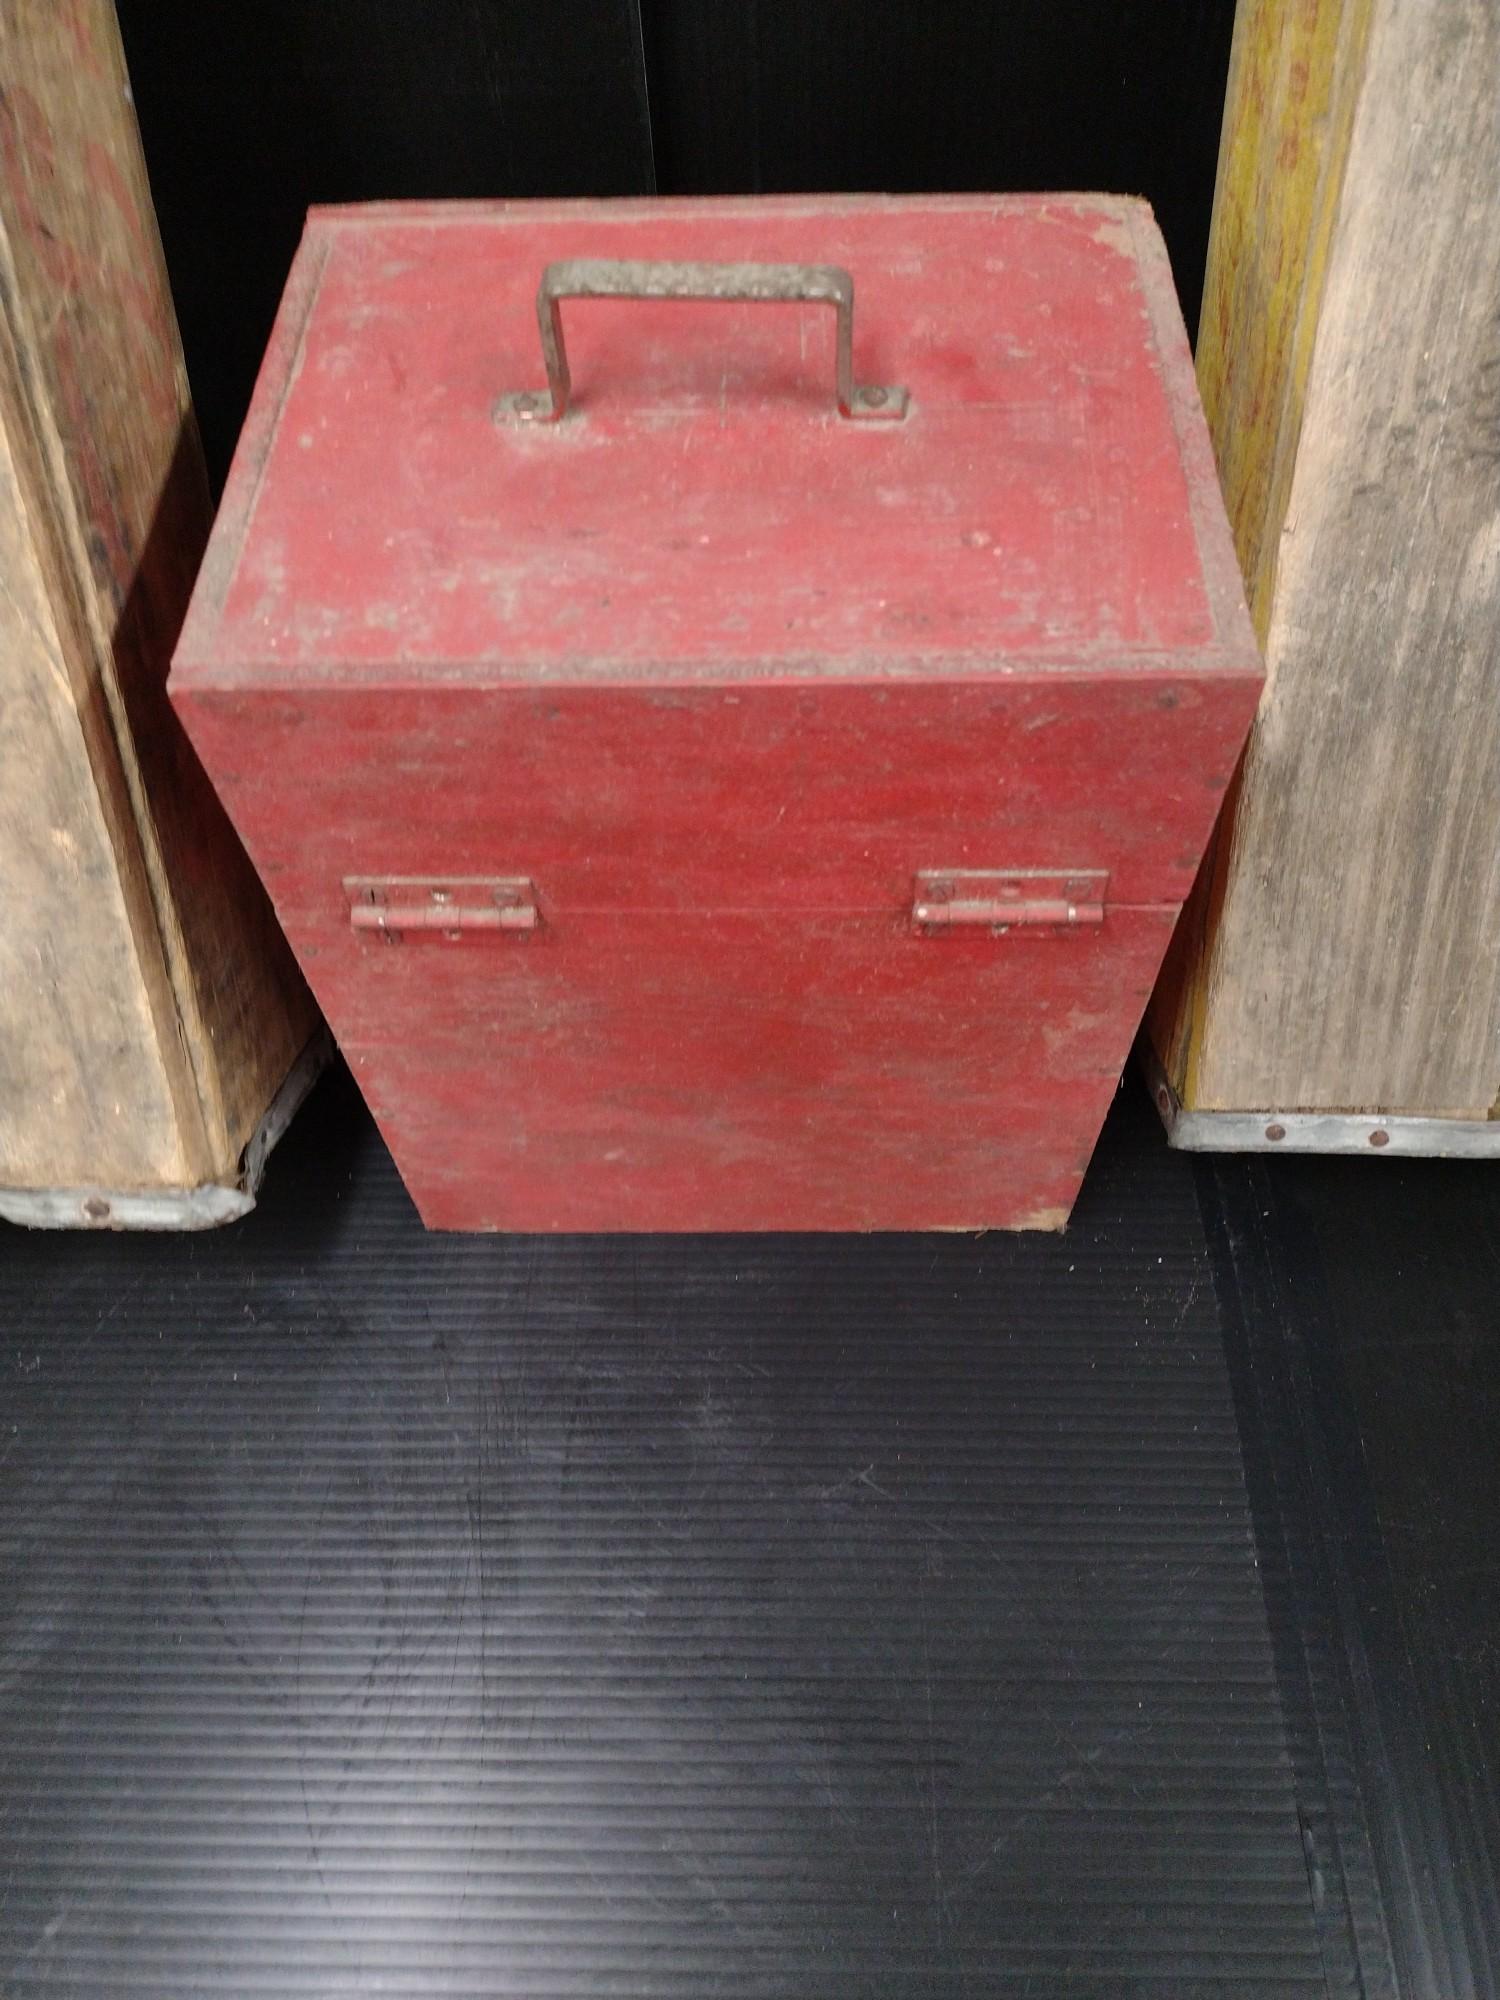 Vintage Soda Bottle Crates And More